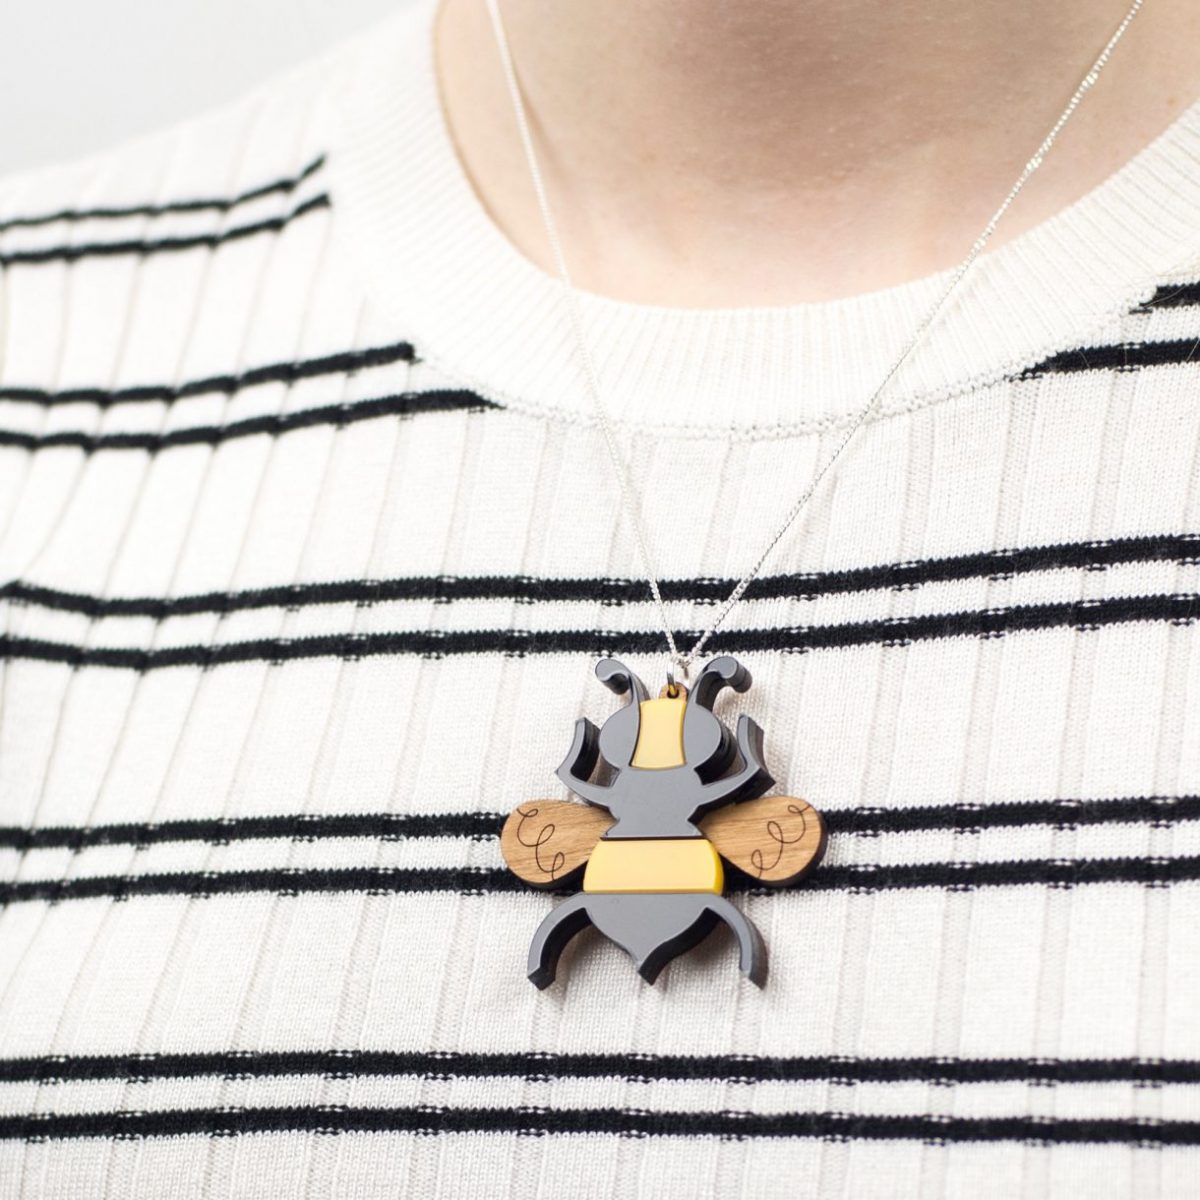 Bee Necklace, Bee Jewellery, Bee Pendant, Insect Jewellery, Laser Cut Acrylic, Statement Necklace, Scandinavian Design, Gift for Bee Lover